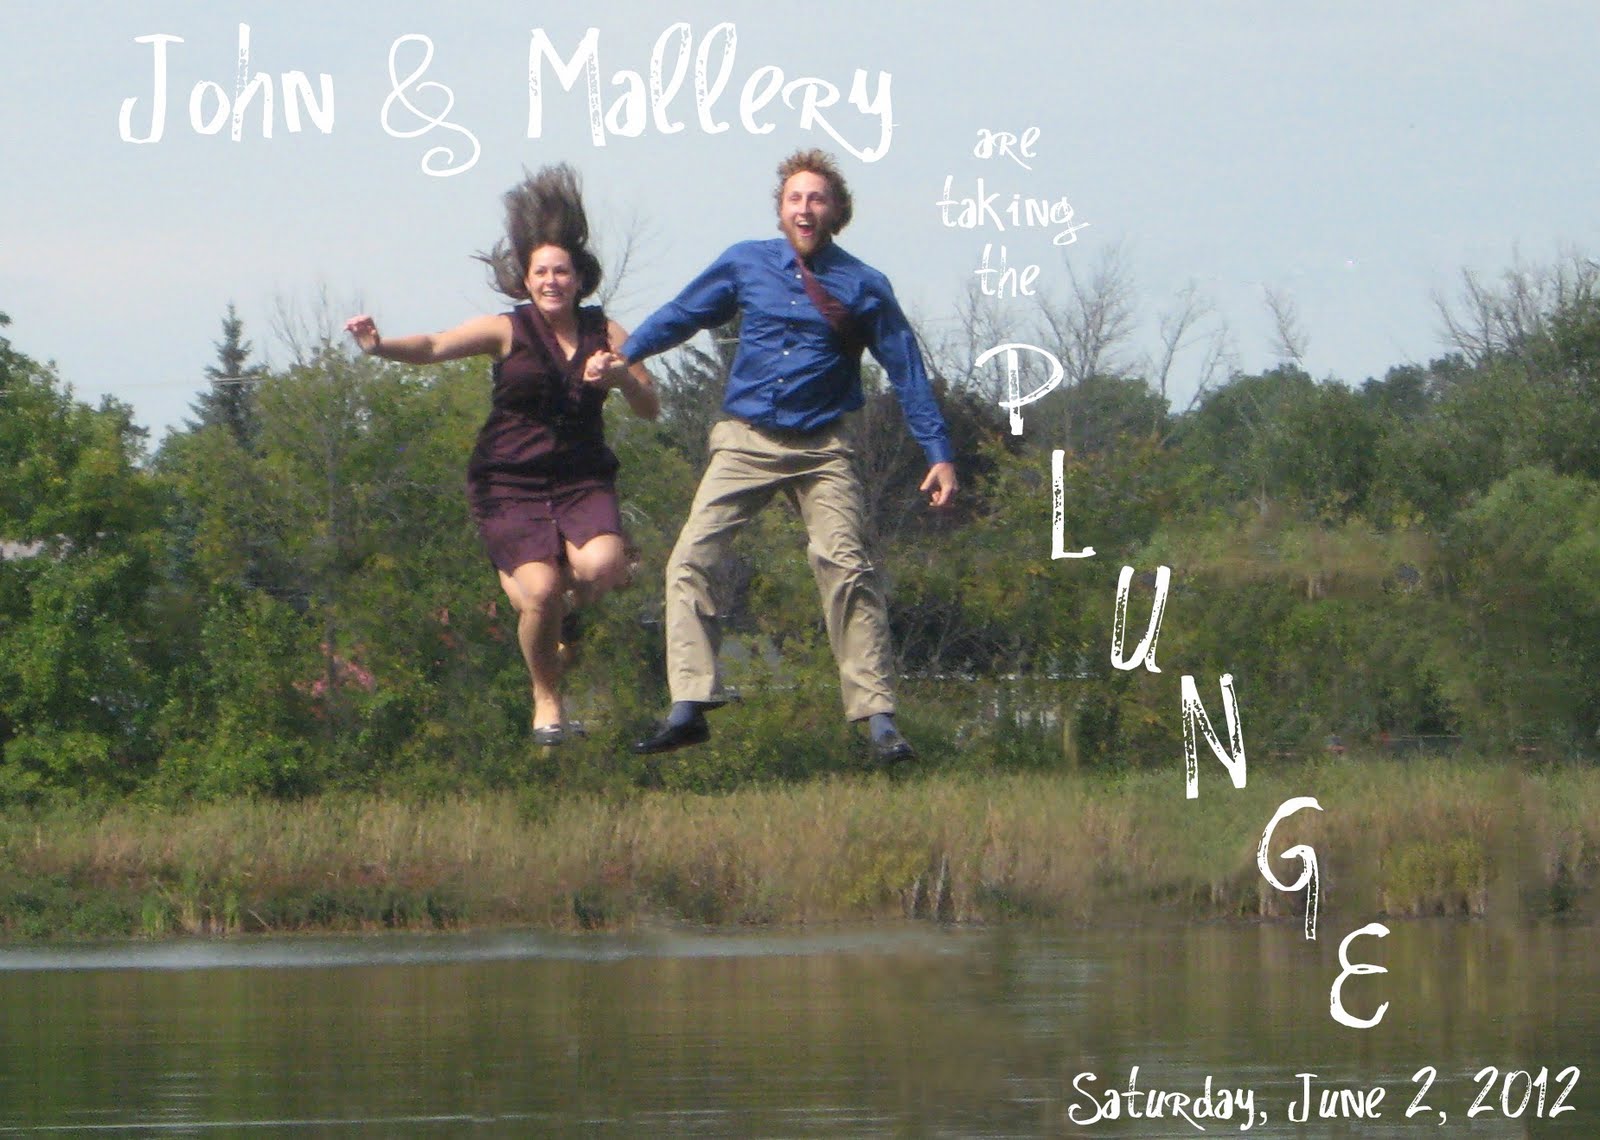 John & Mallery are taking the PLUNGE